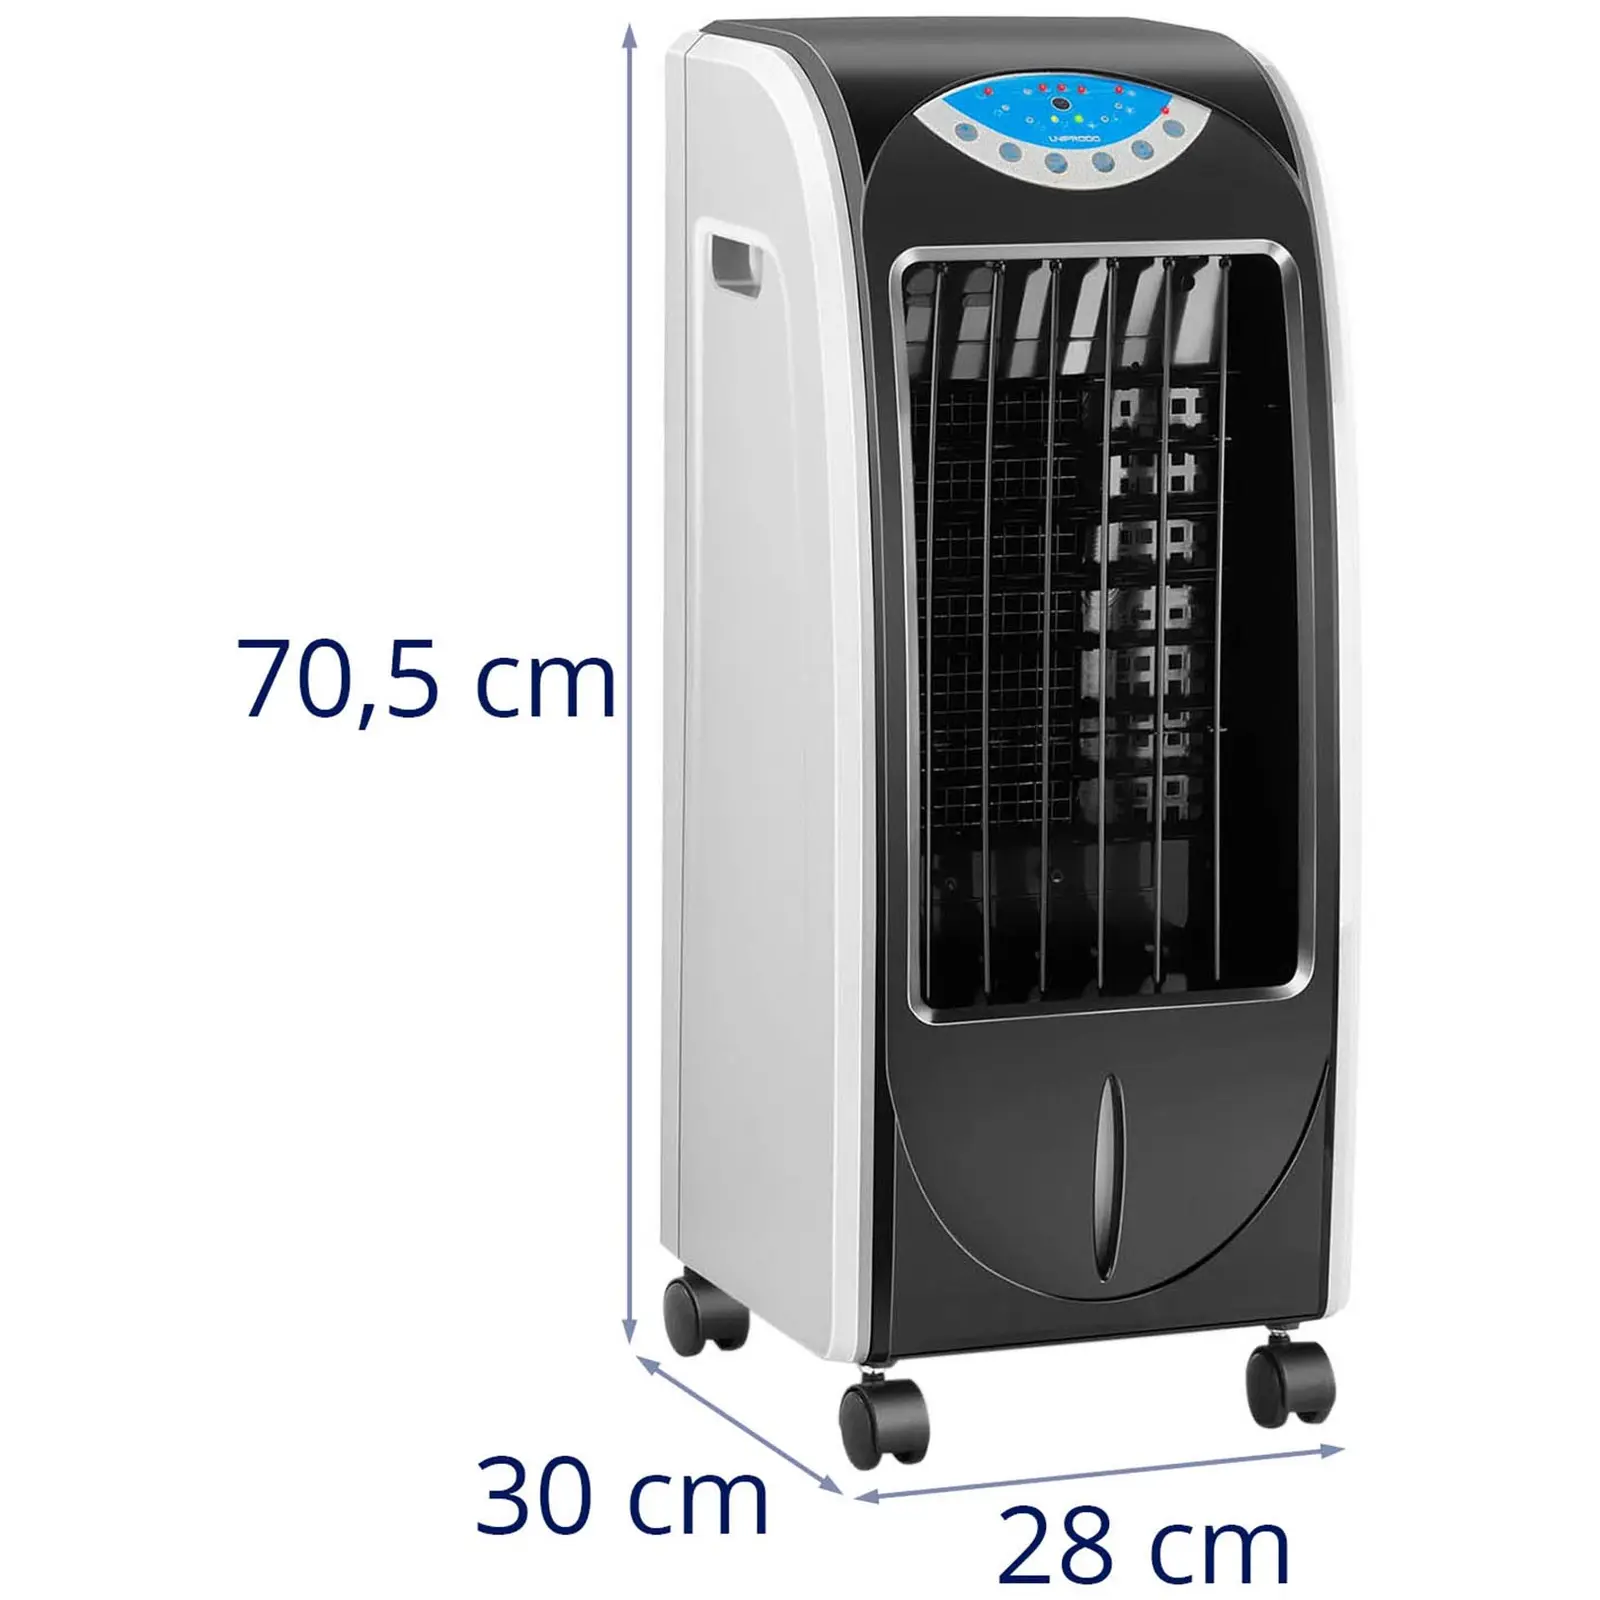 Factory second Air Cooler - 3-in-1 - 6 L water tank